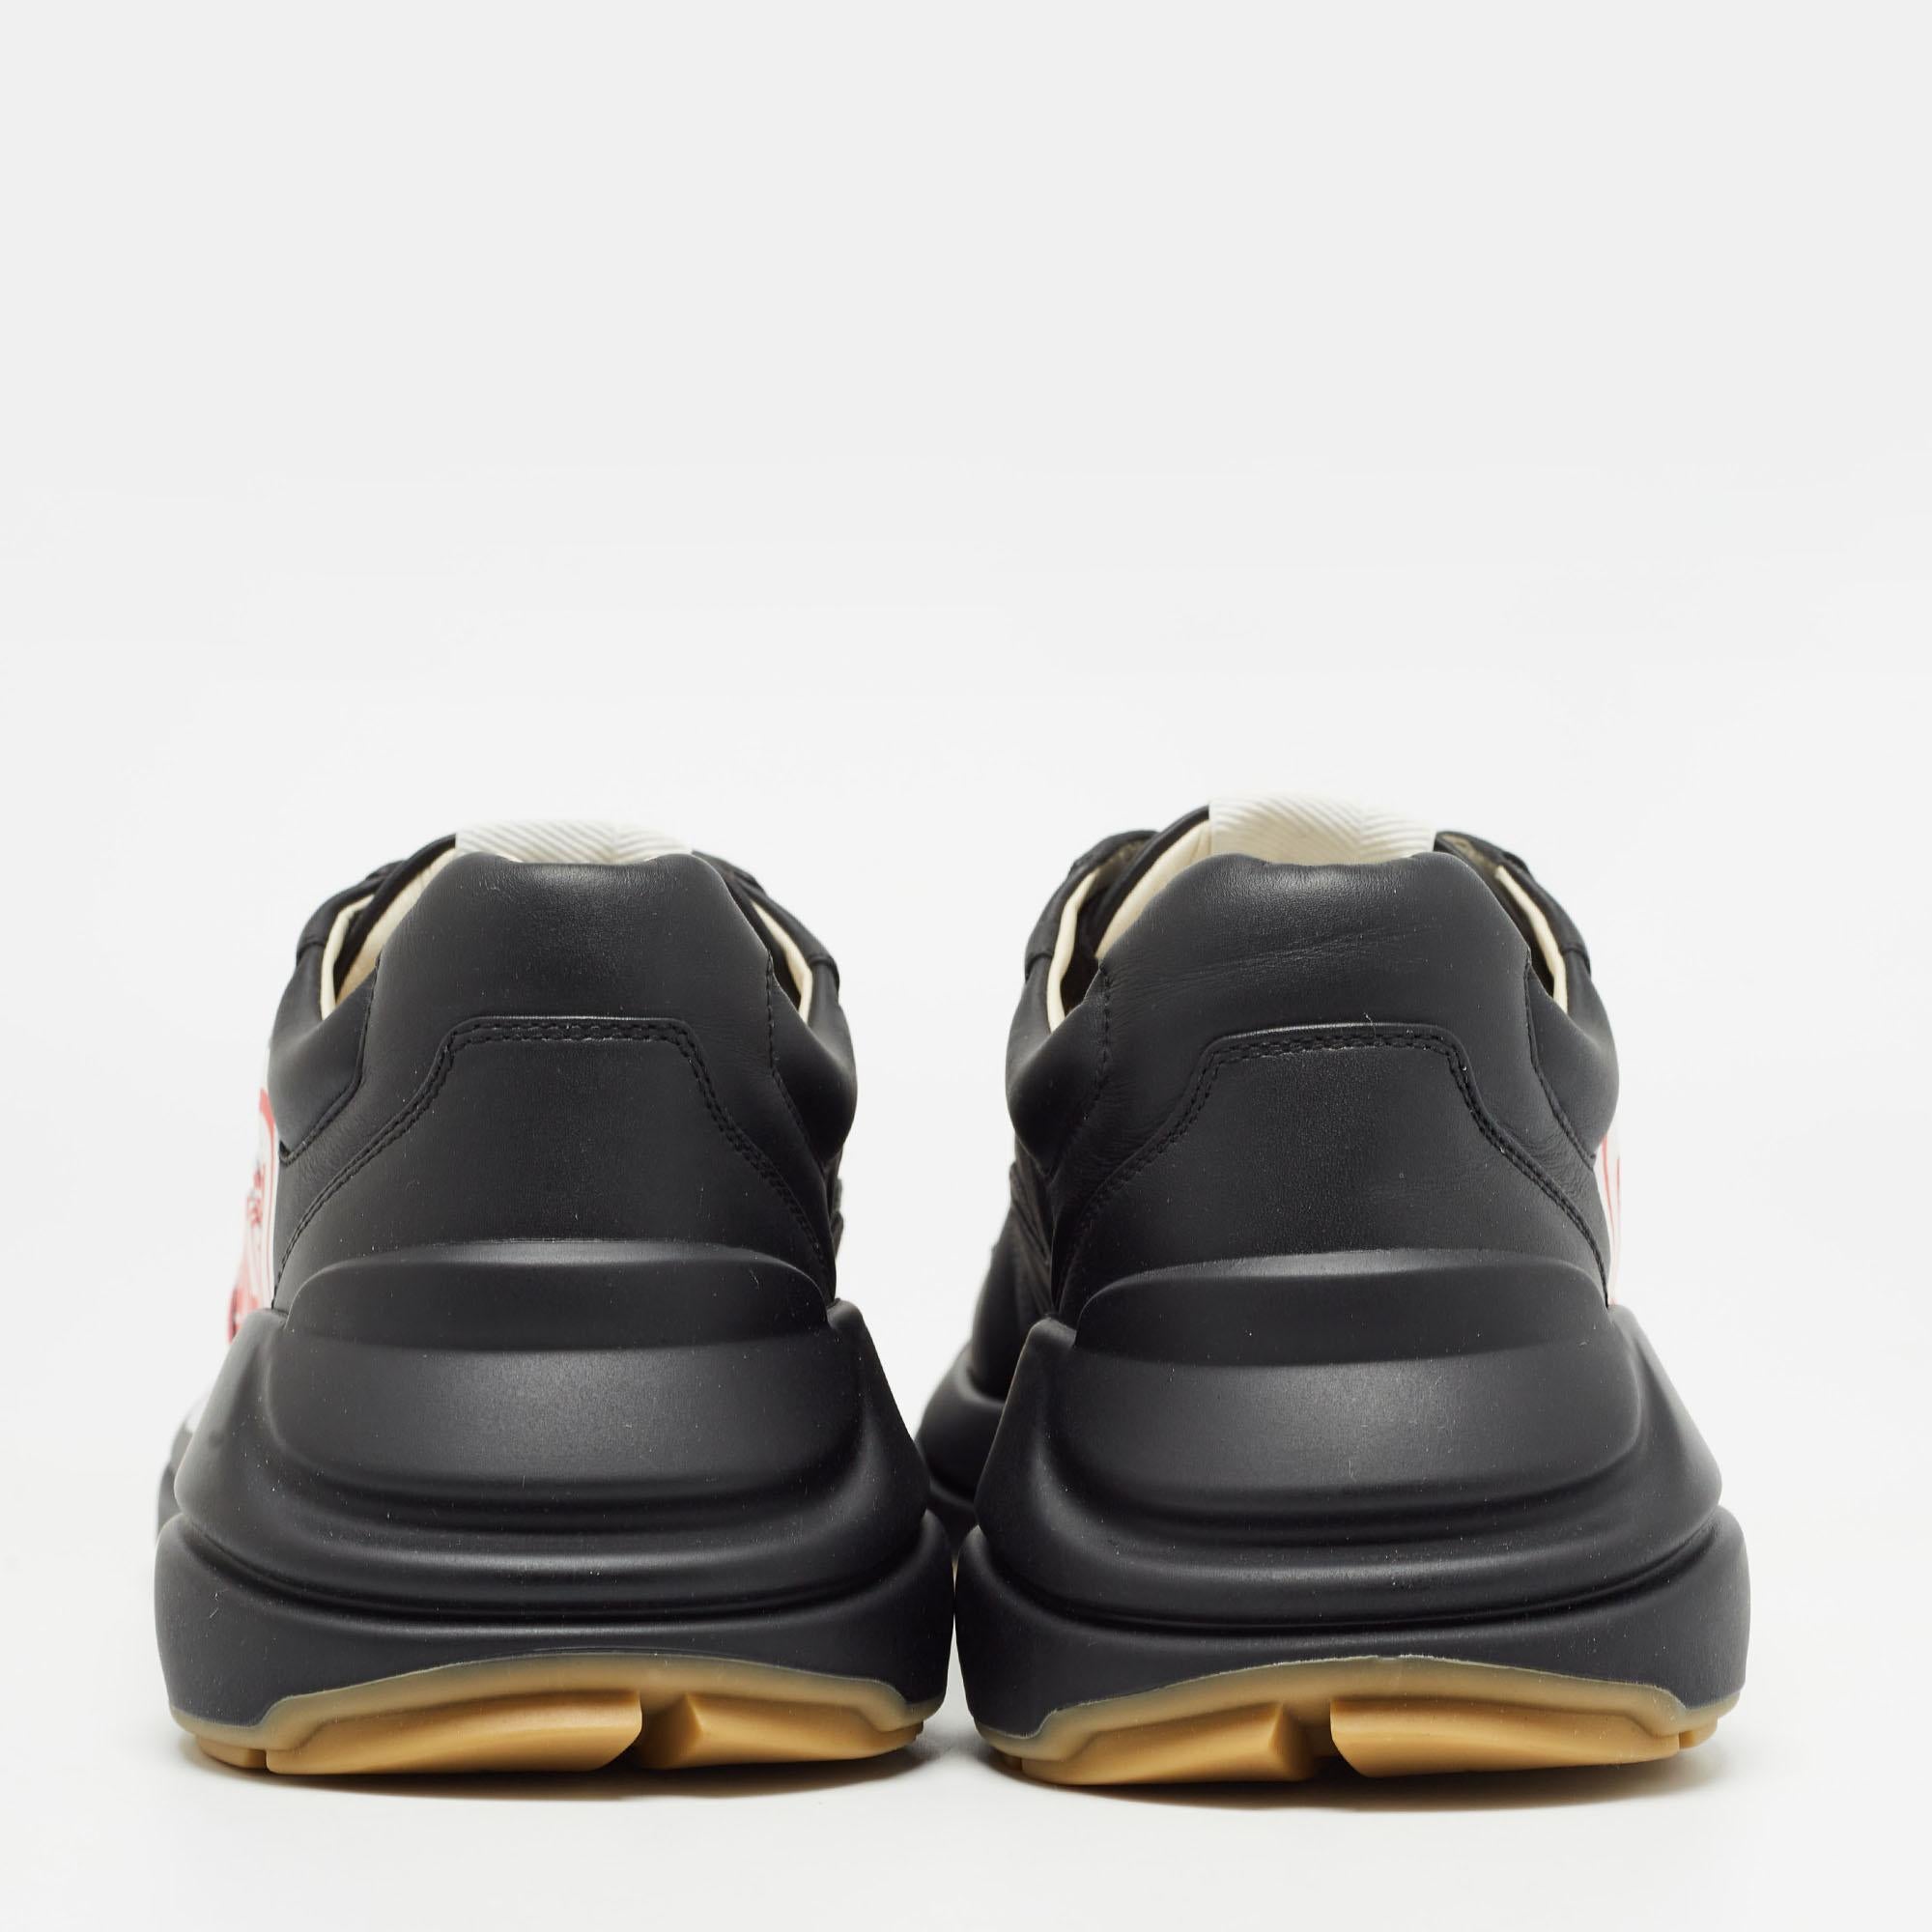 Gucci Black Leather Logo Rhyton Sneakers Size 41 For Sale 1